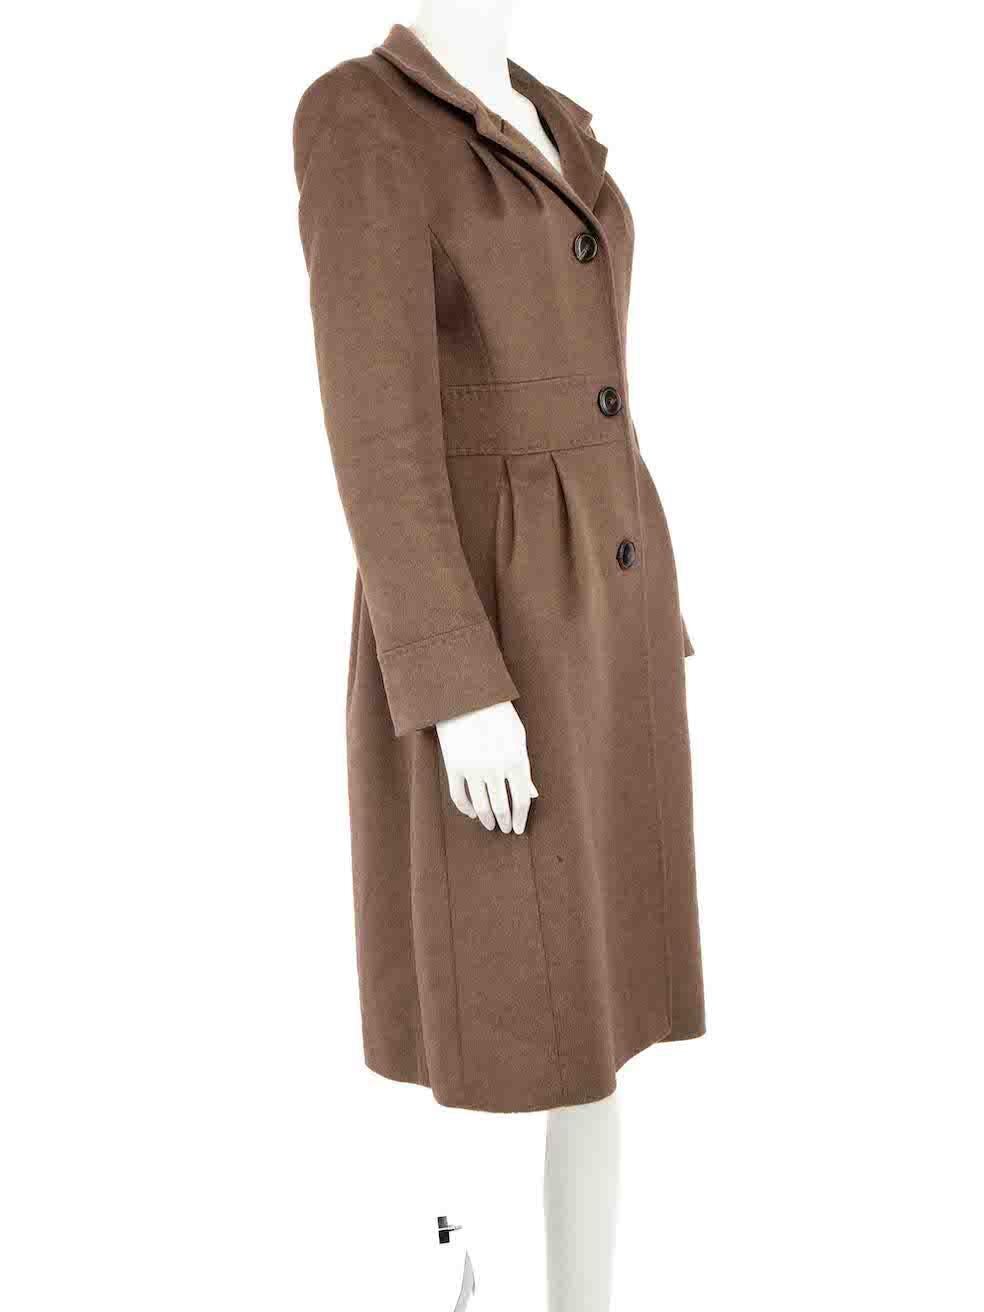 CONDITION is Very good. Minimal wear to coat is evident. Minimal wear to the lining seams with straining to the fabric on this used Escada designer resale item.
 
Details
Brown
Angora wool
Coat
Single breasted
Button up fastening
Long sleeves
2x